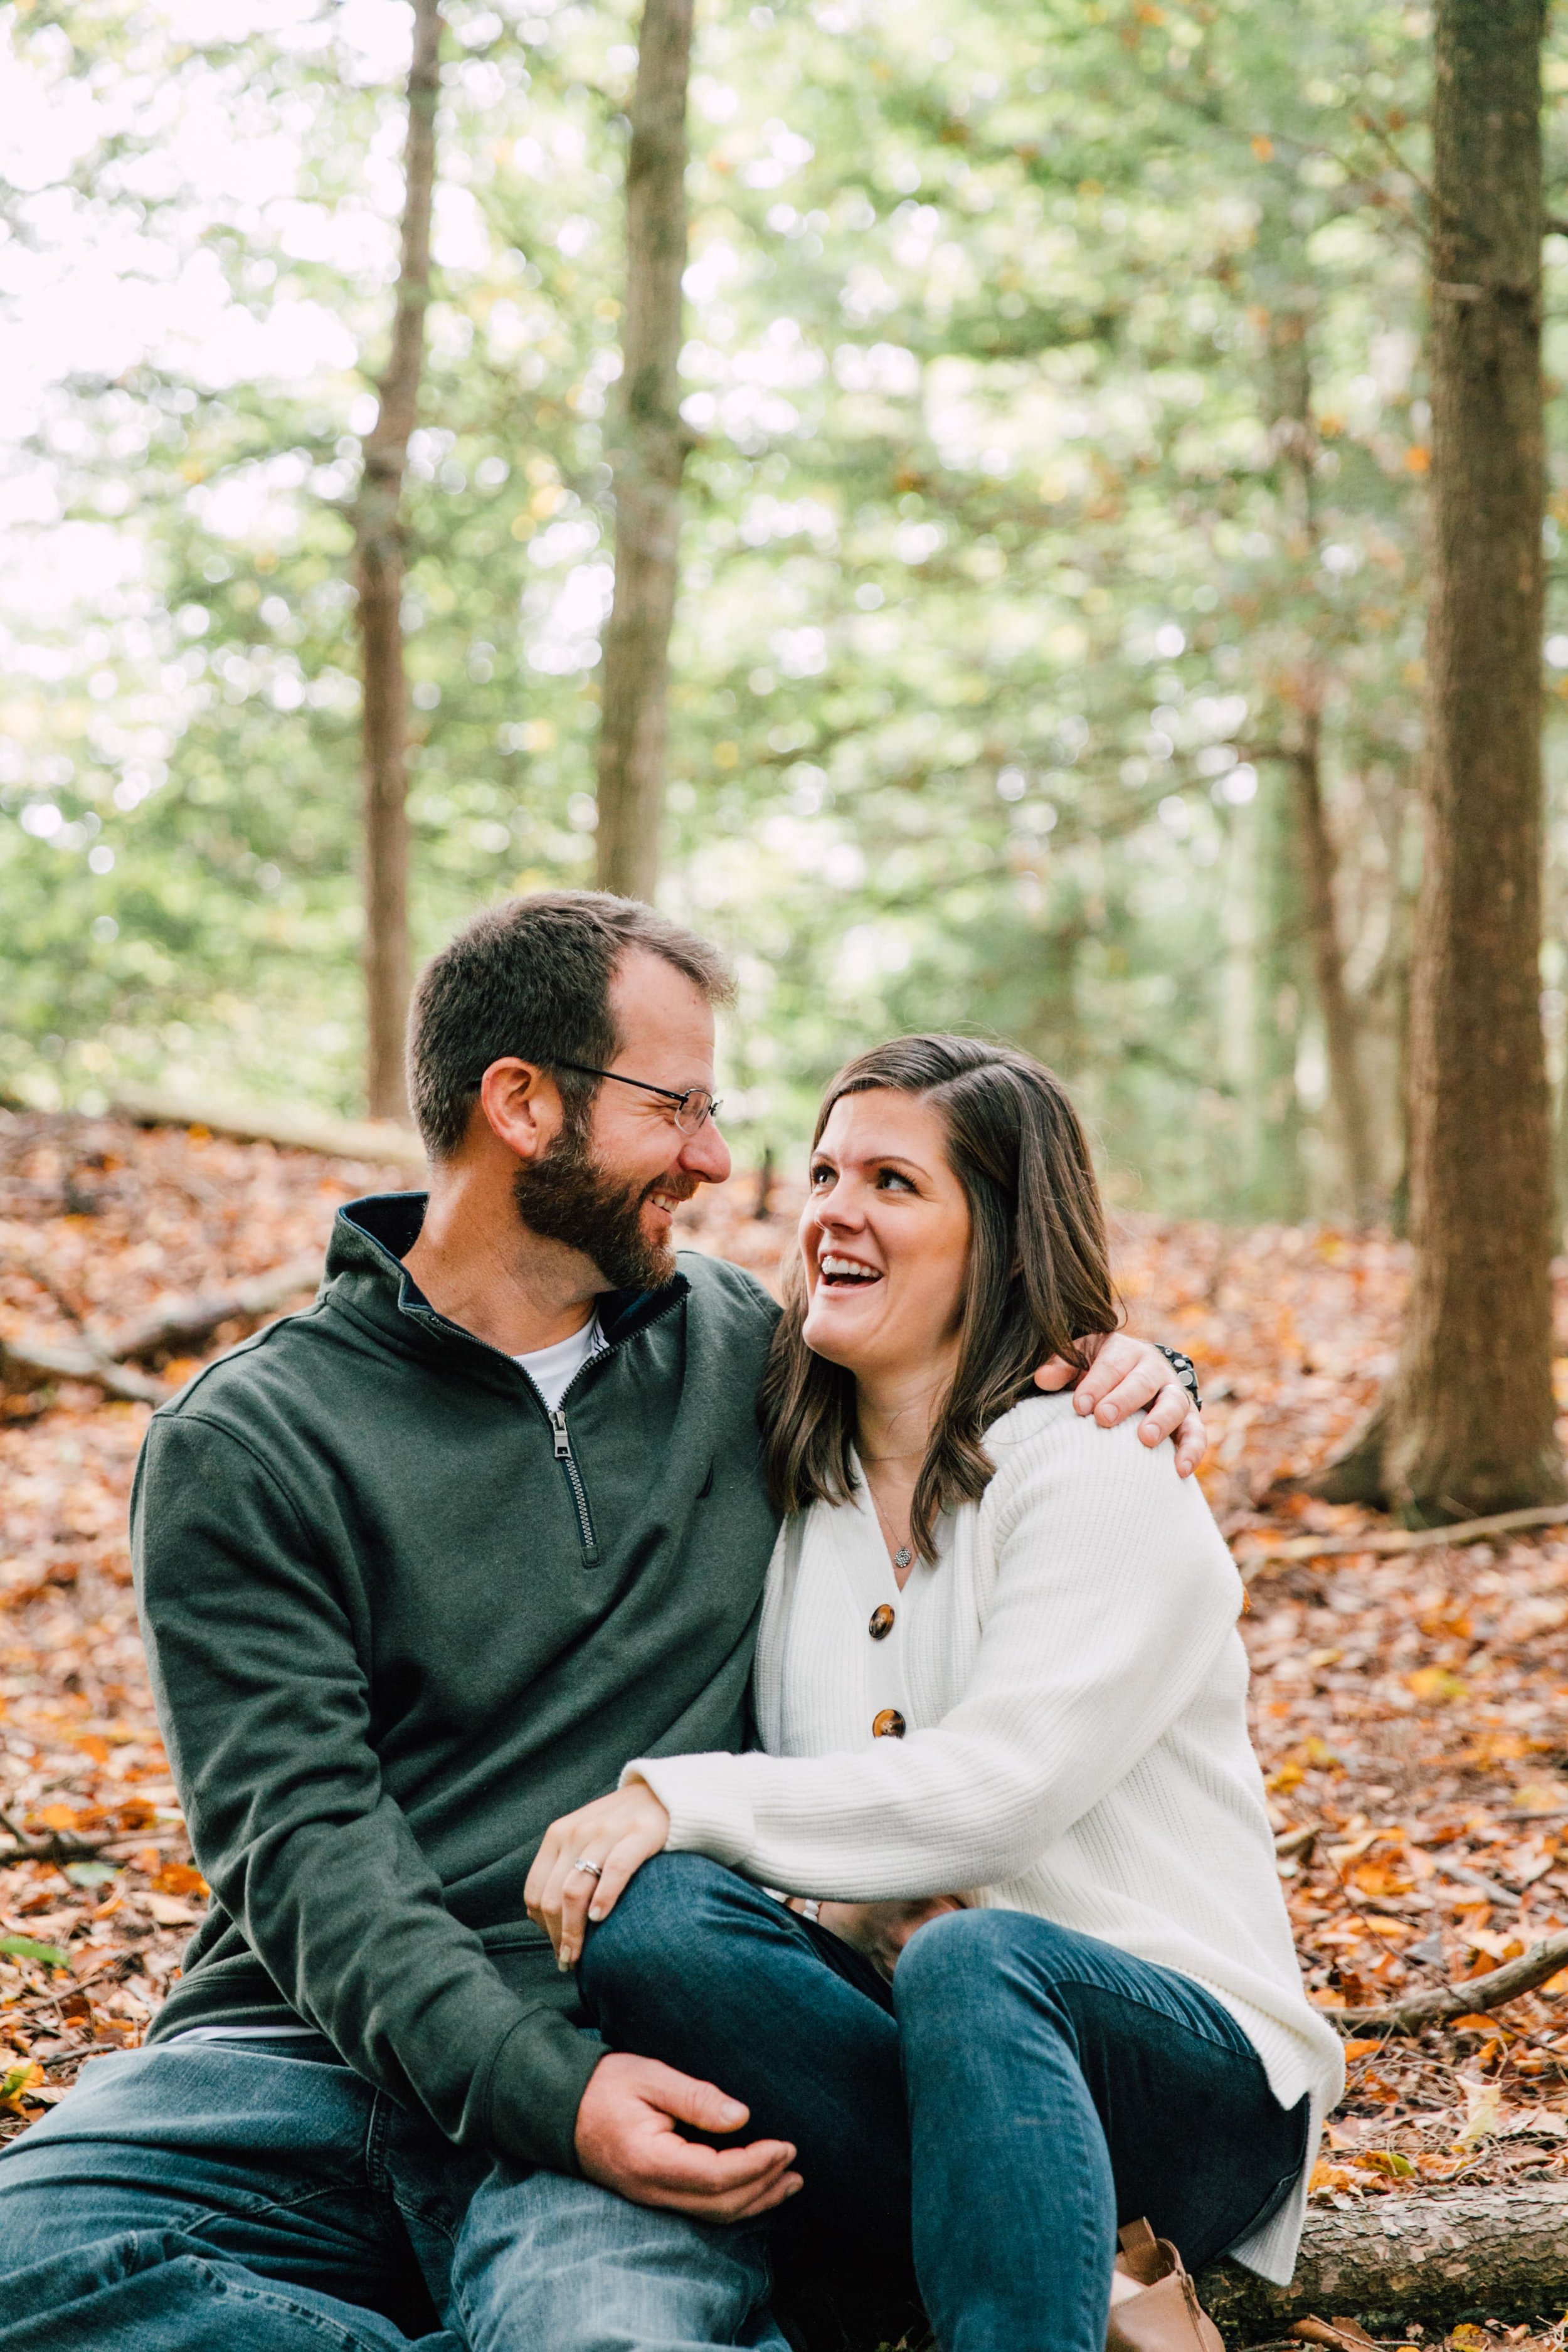  the couple laughs together as they cuddle up on the fall leaf lined ground during their forest engagement photos 